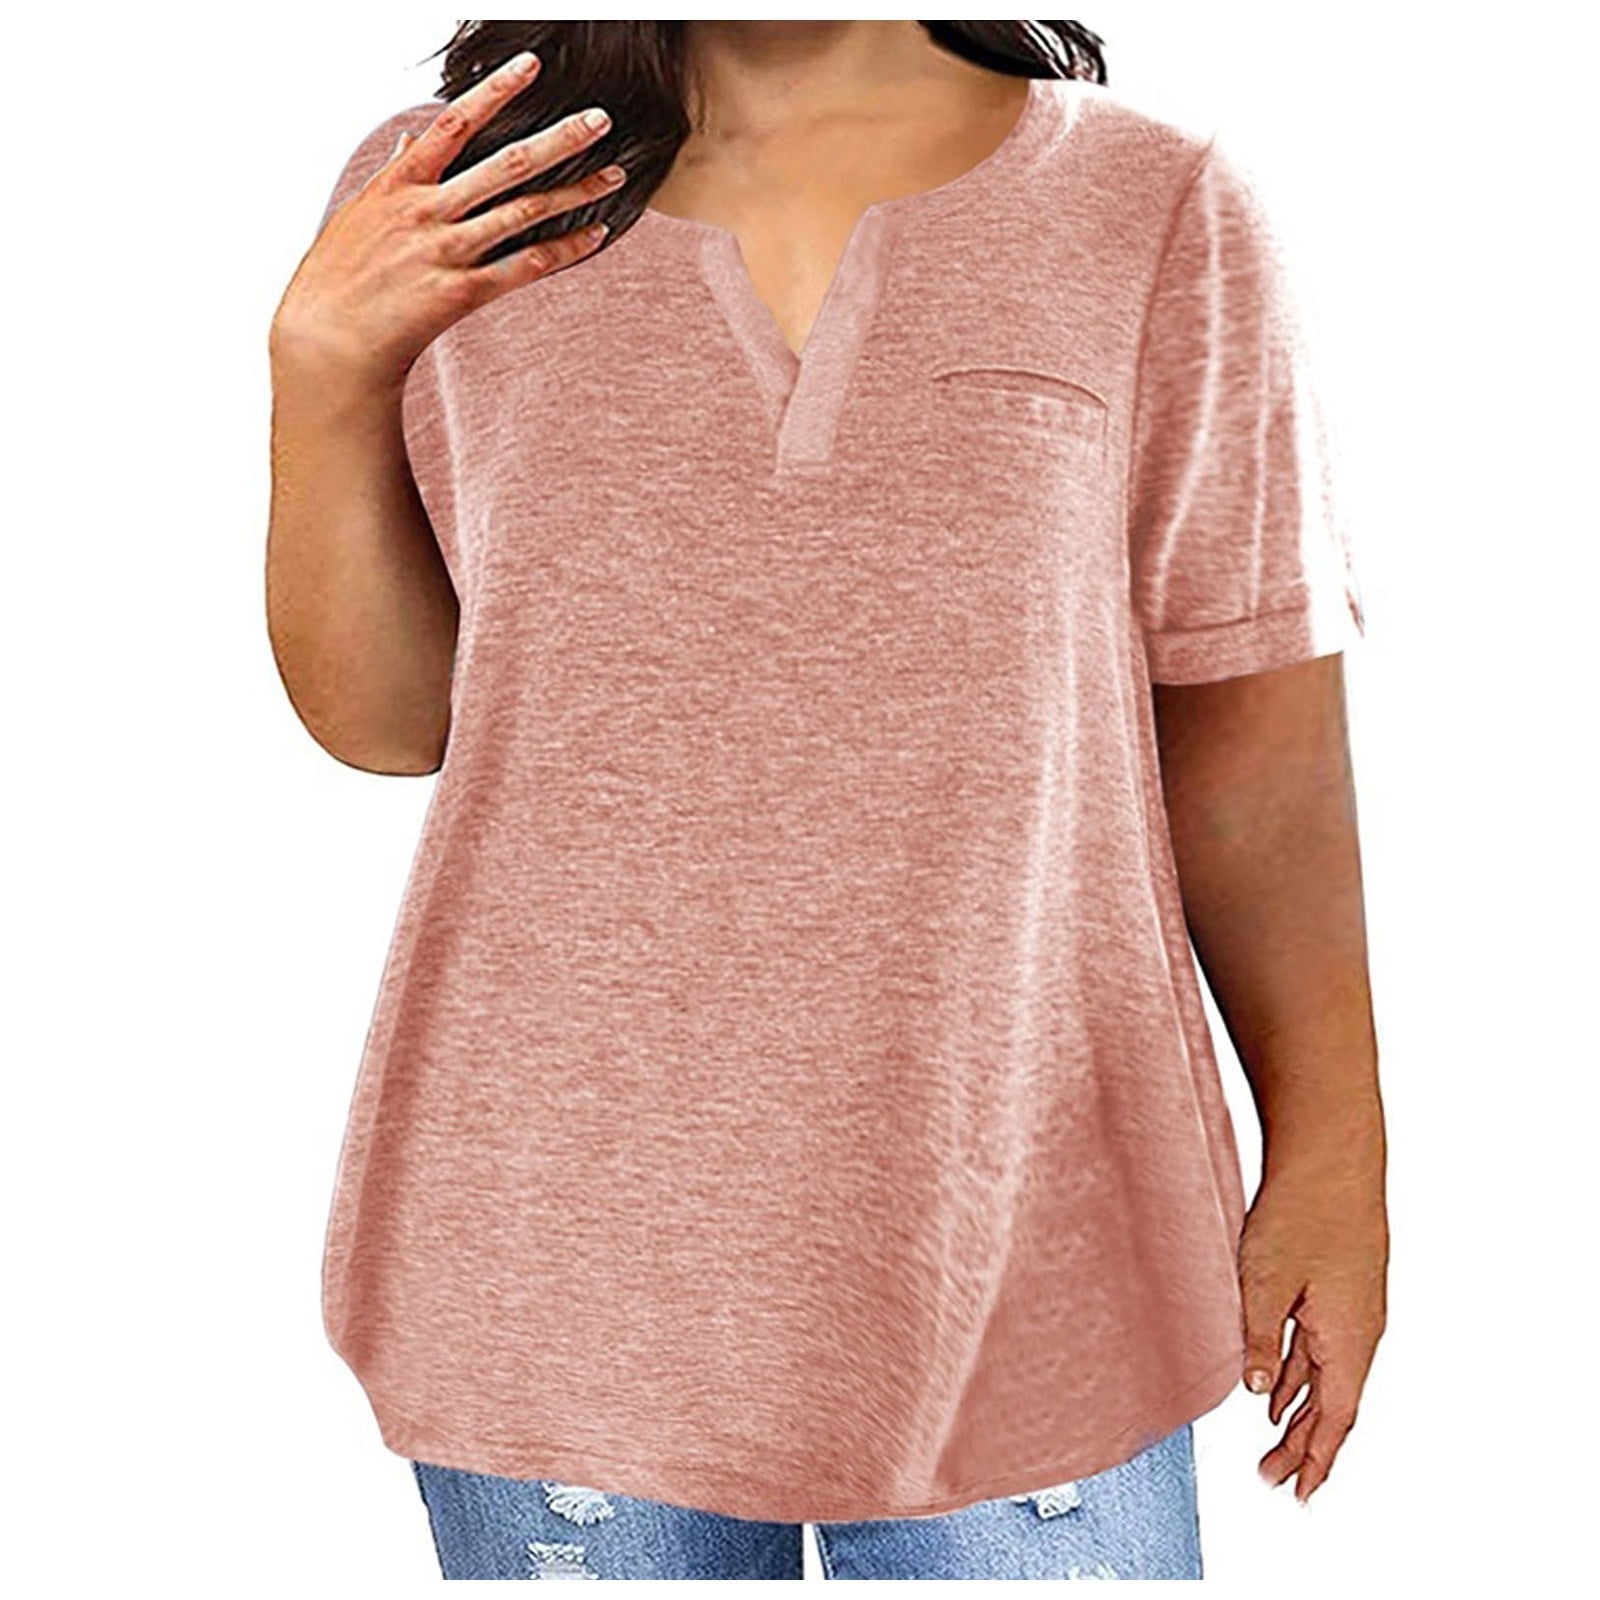 GERsome Plus Size Summer T Shirts Women Tops Short Sleeve Round Neck ...